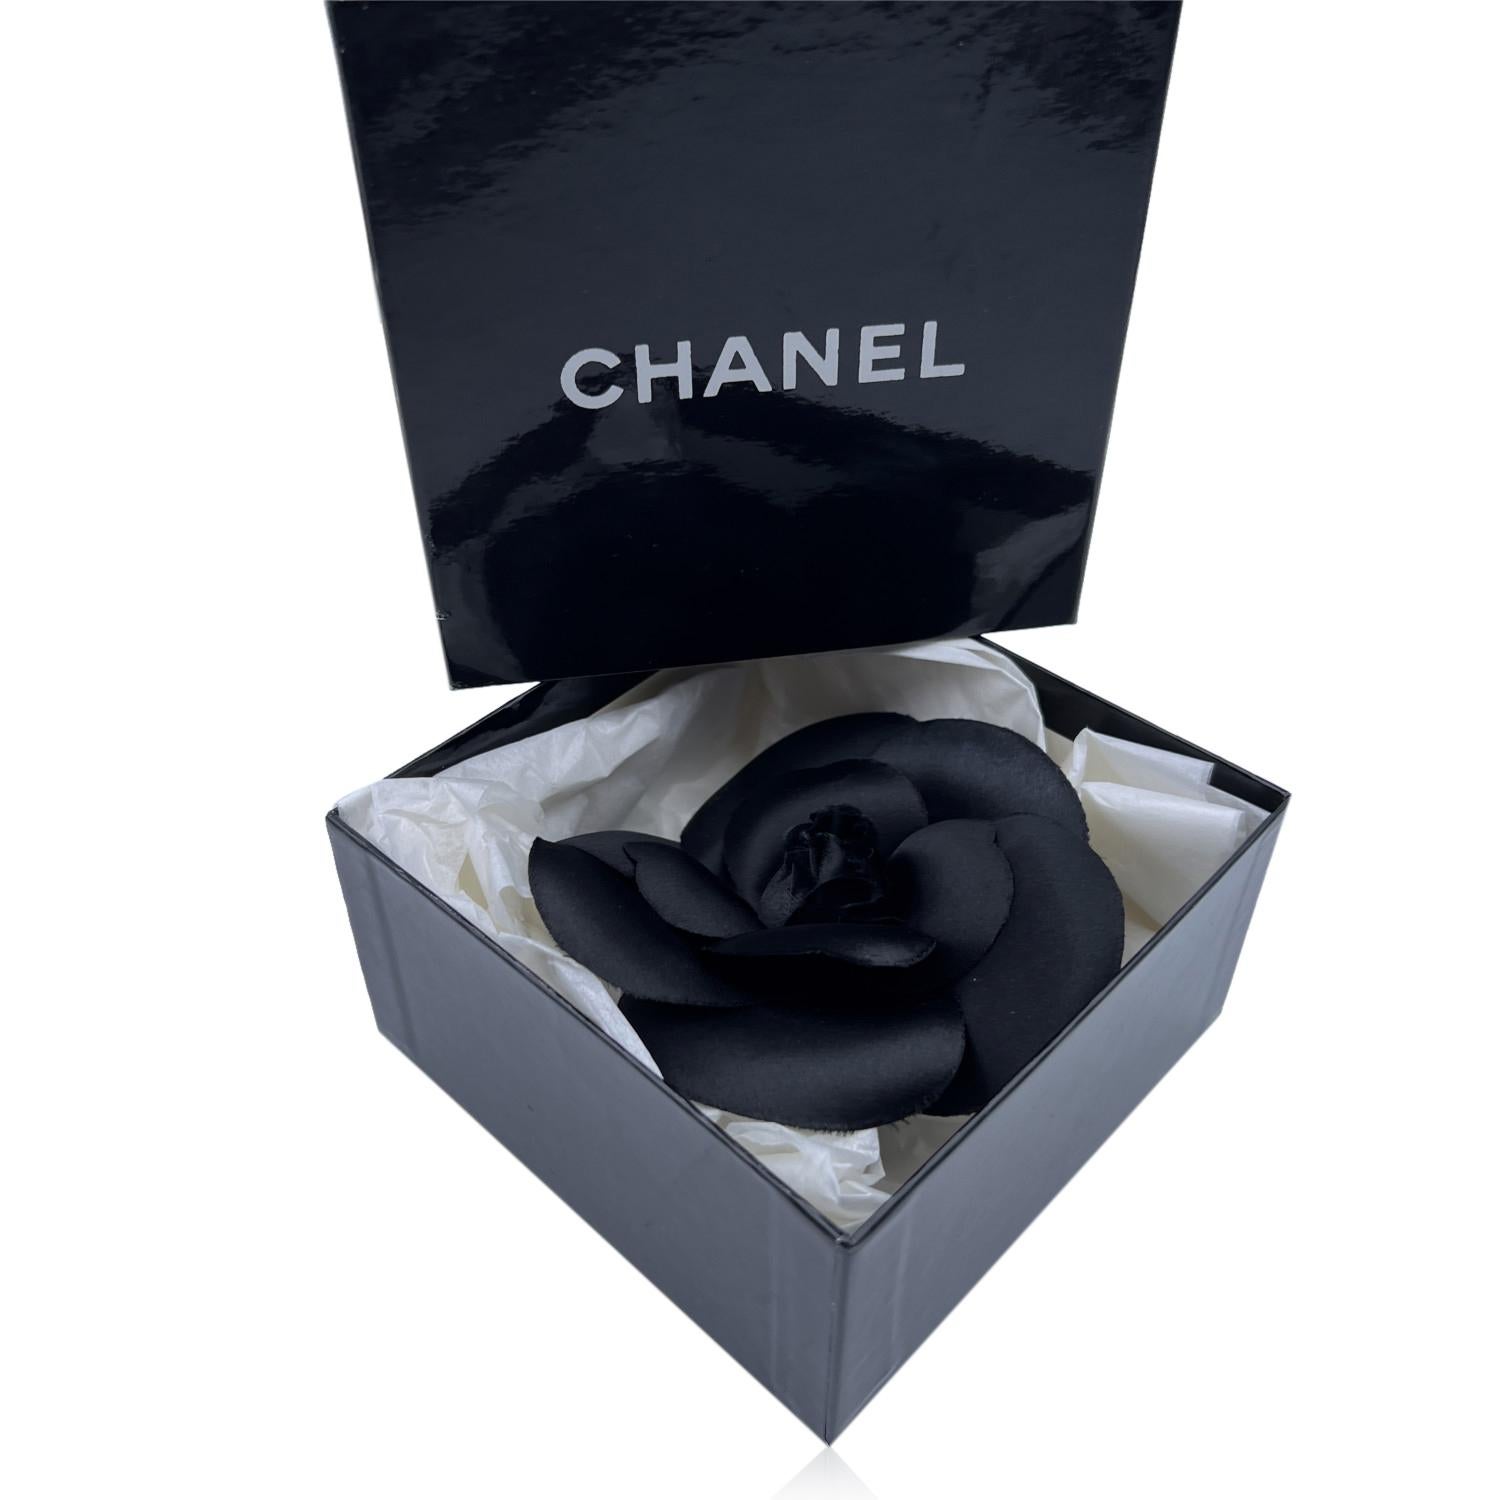 Chanel Vintage Camelia Camellia Flower Pin Brooch. Black satin silk petals. Safety pin closure. Measurements: diameter: 3.5 inches - 8.9 cm. 'CHANEL - CC - Made in France' oval tab on the back

Condition

A - EXCELLENT

Gently used. Chanel box